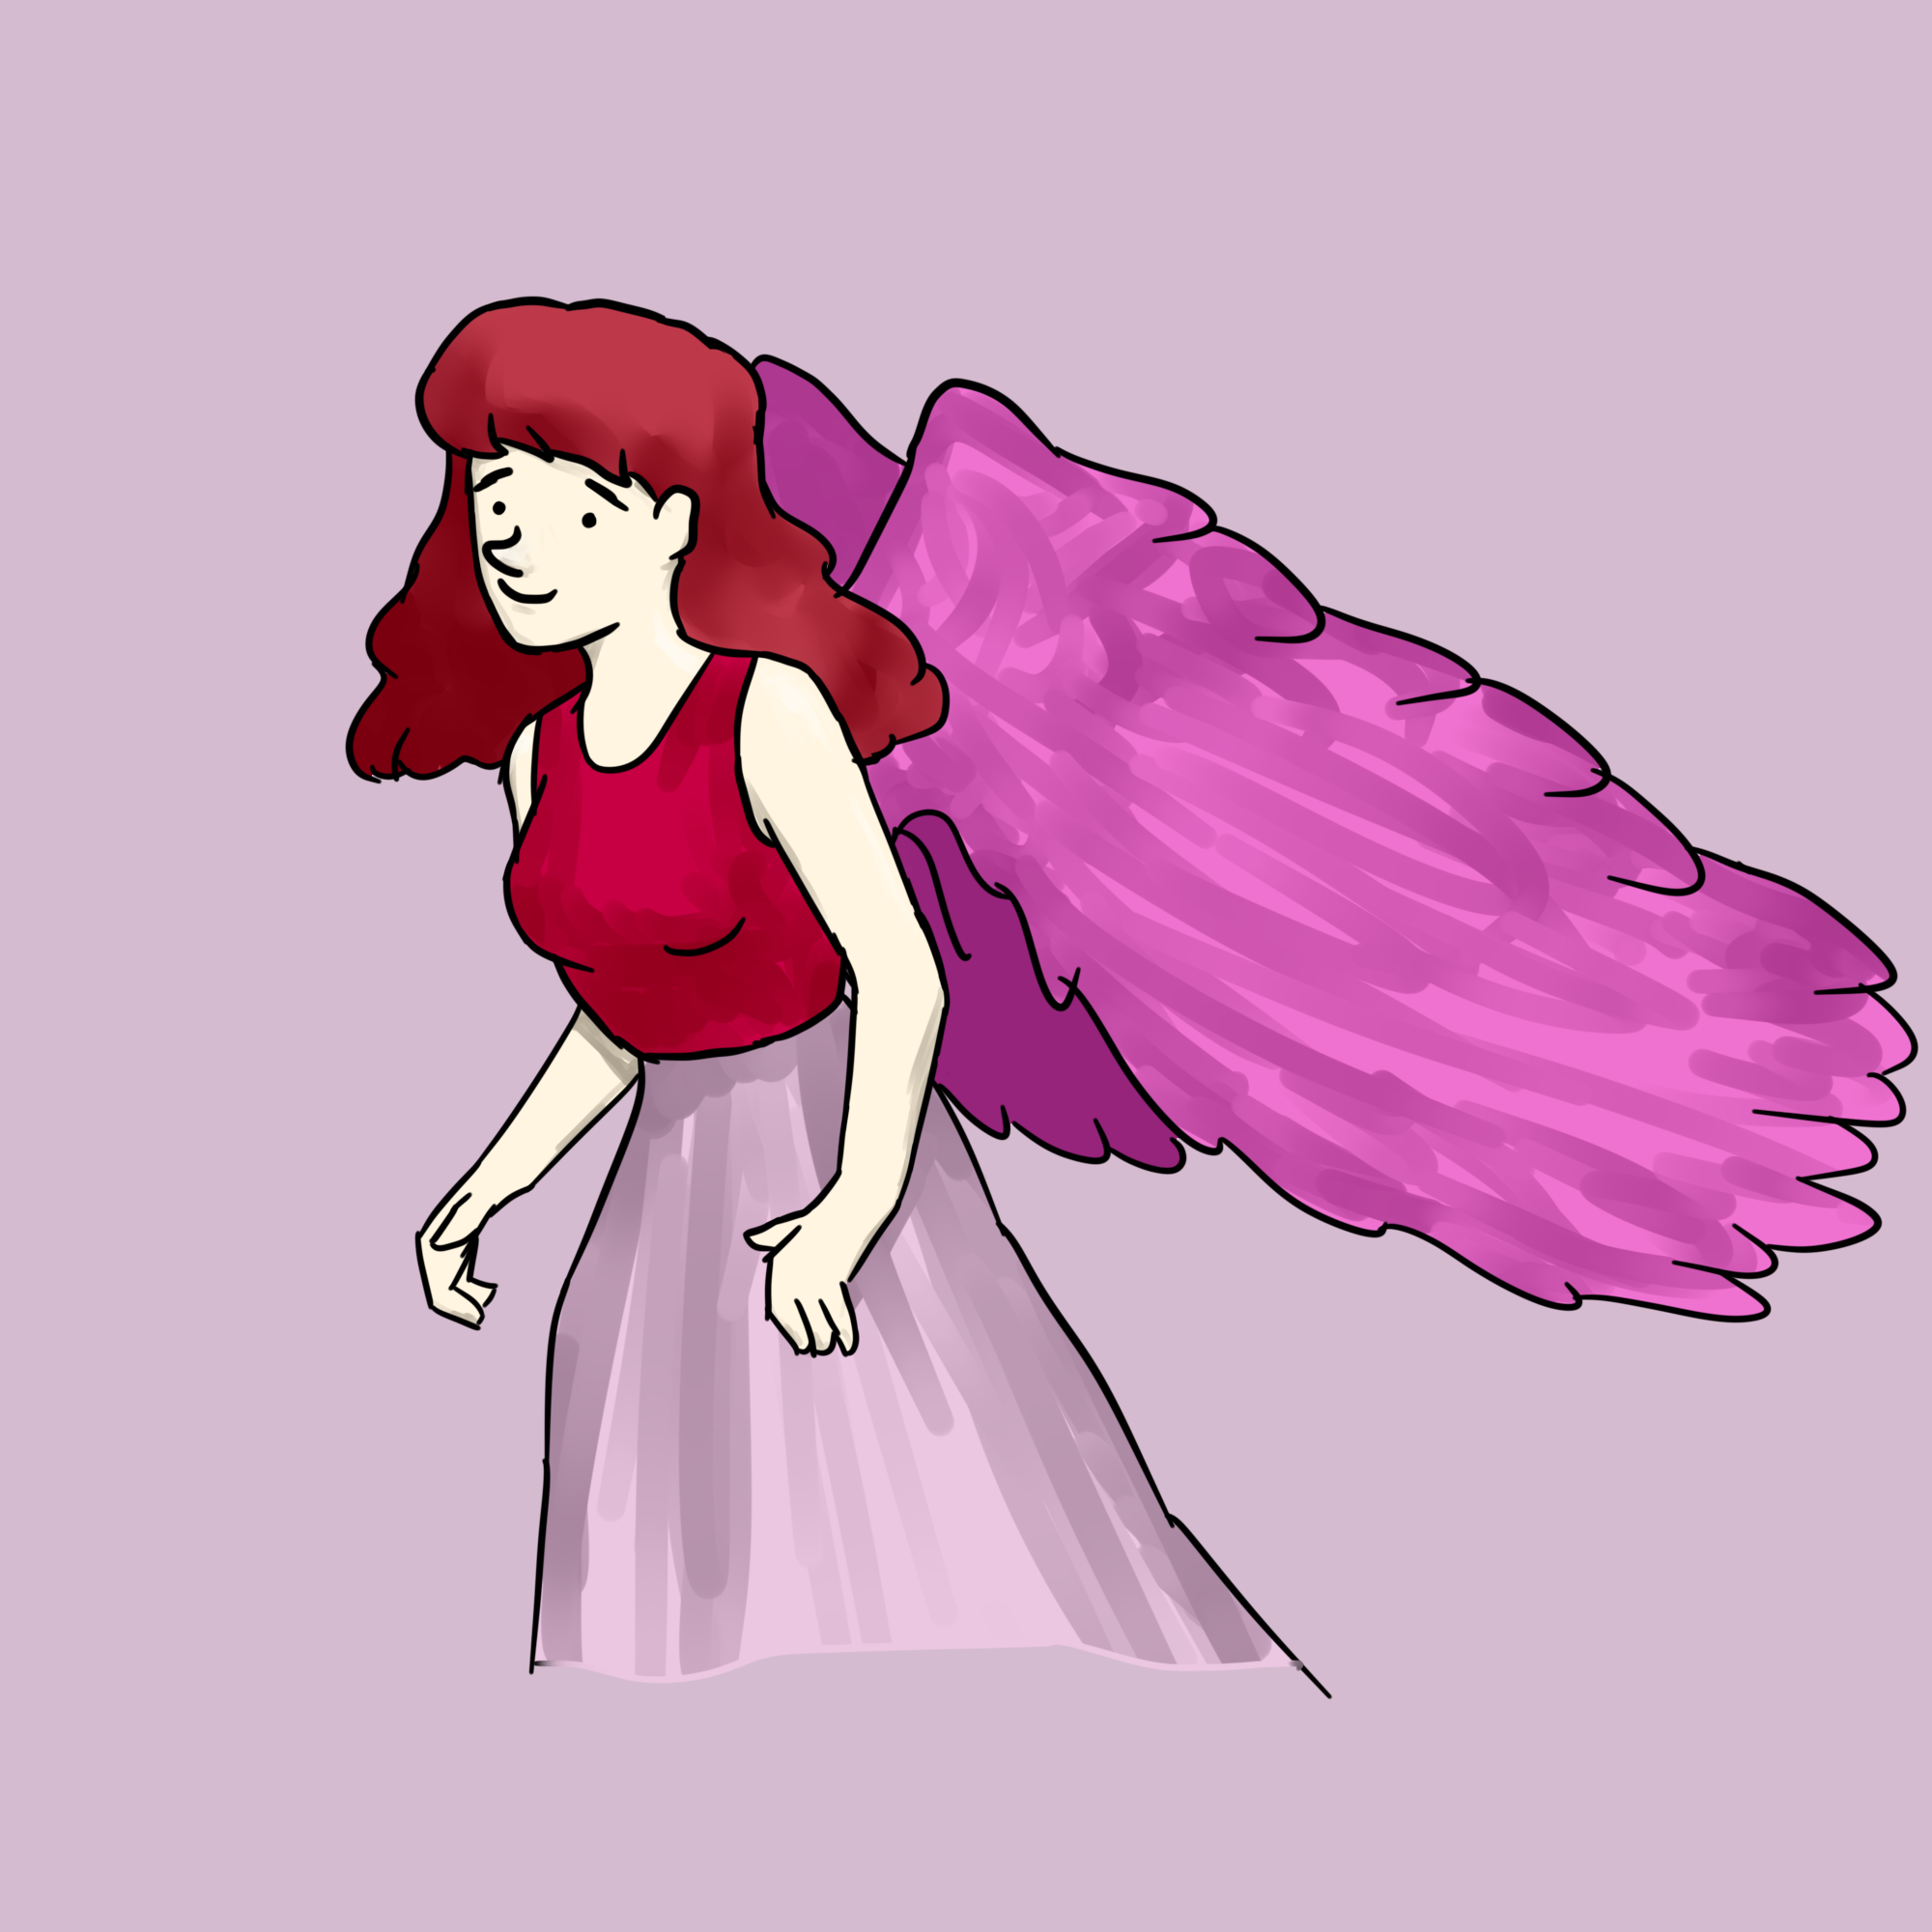 angelgirl_by_zanzalur-dclbubl.png